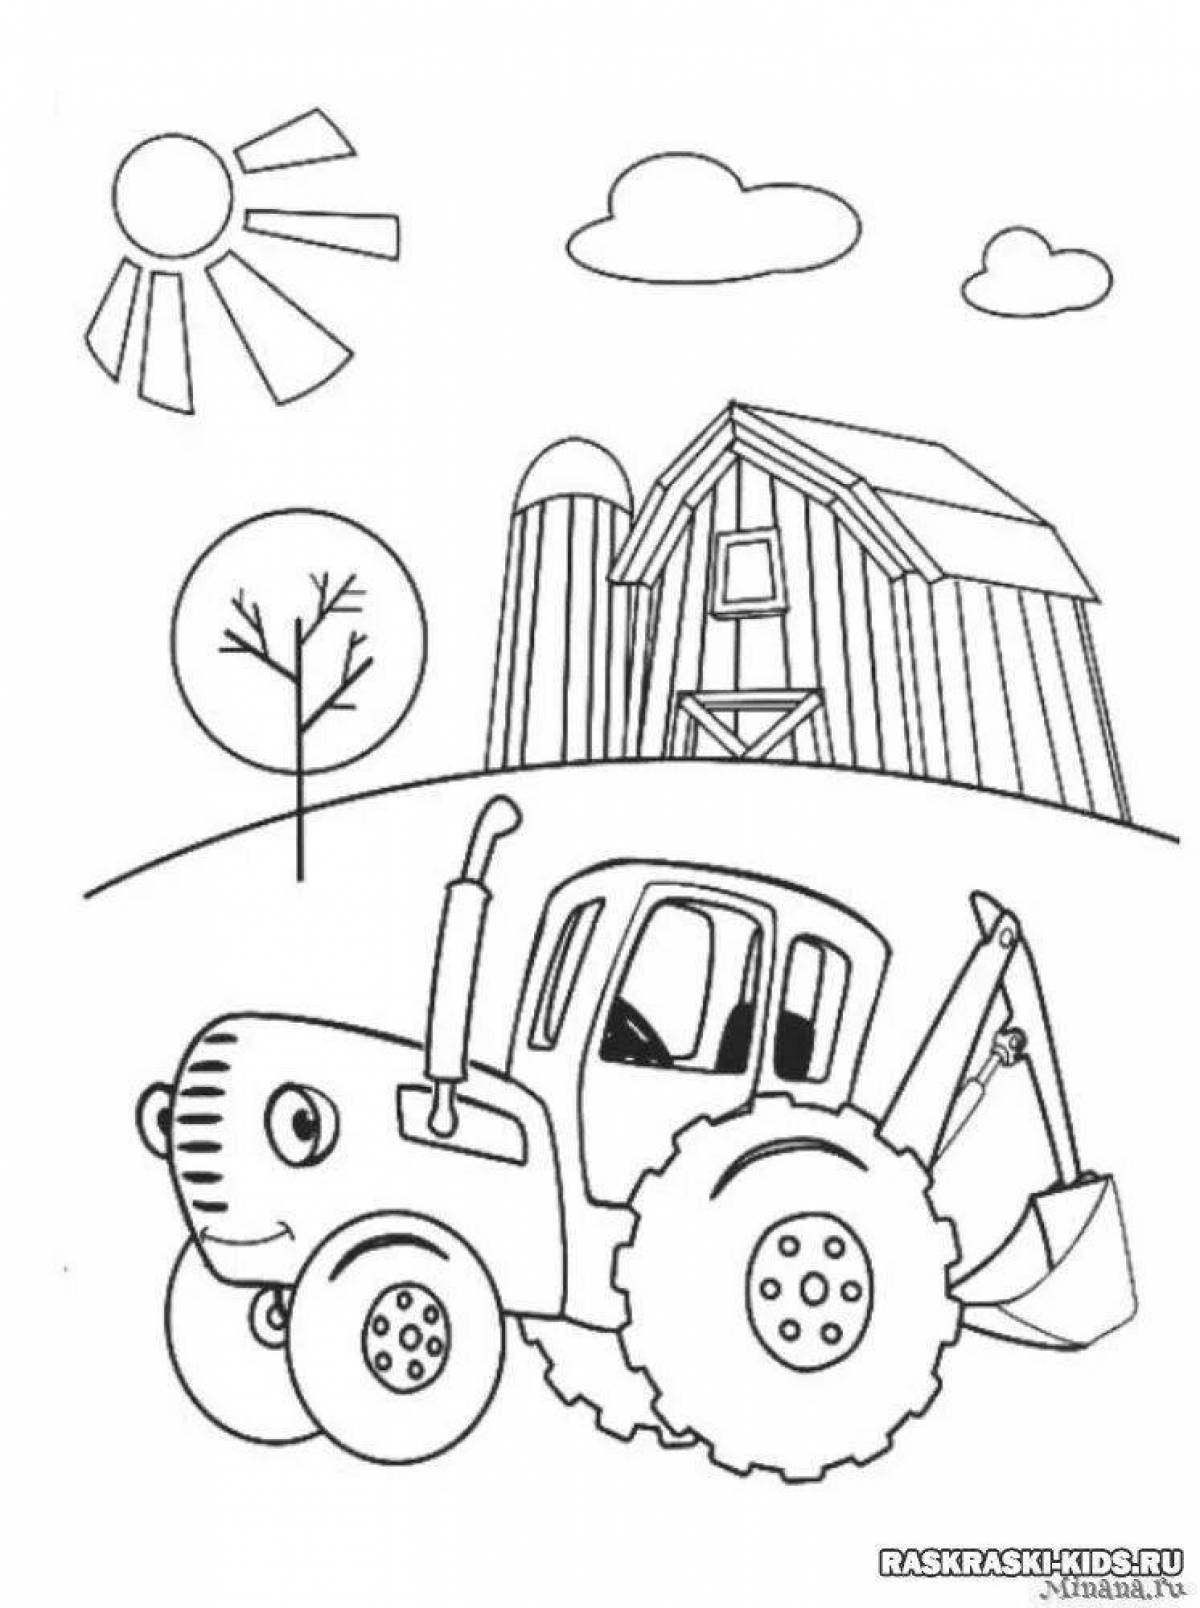 Blue tractor fun coloring game